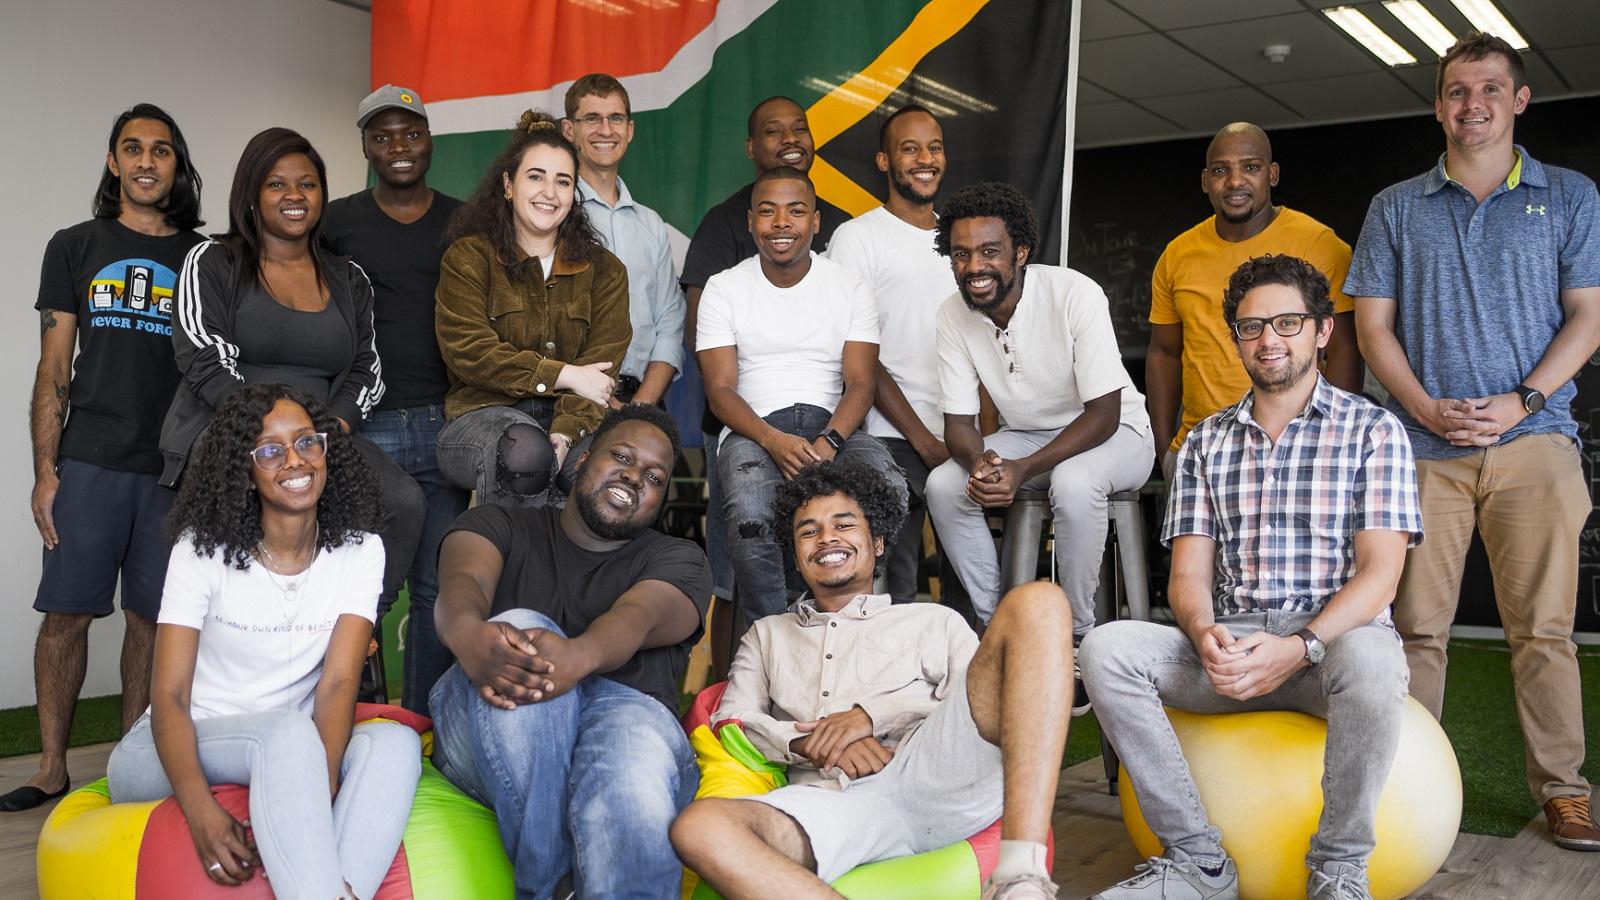 South Africa's Pineapple Raises $21.3M in Series B to Revolutionize Insurance 🚀 🇿🇦